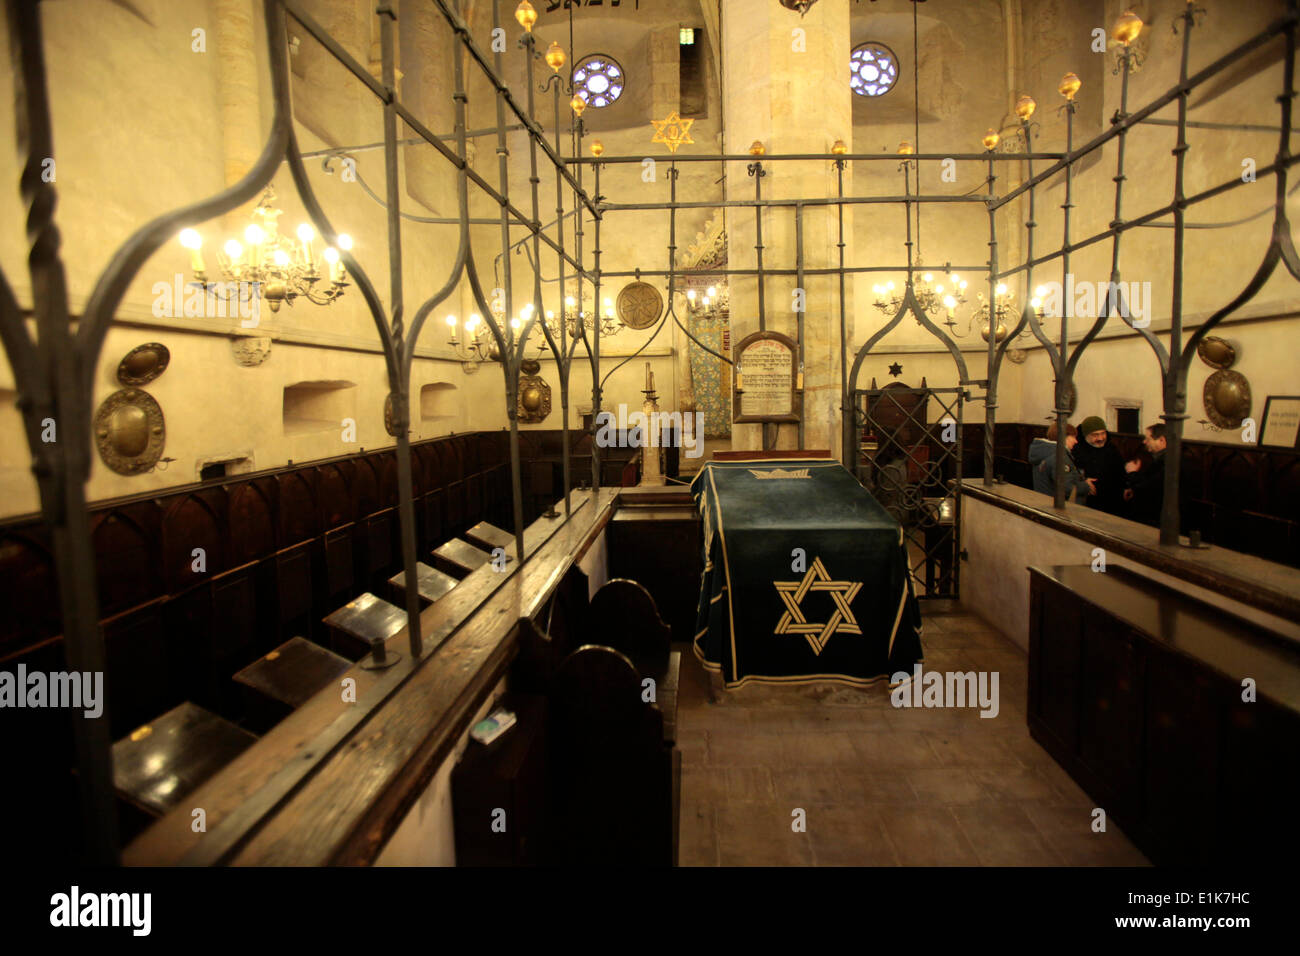 The interior of the Old-New Synagogue, the oldest synagogue in Europe, built around 1270. Stock Photo